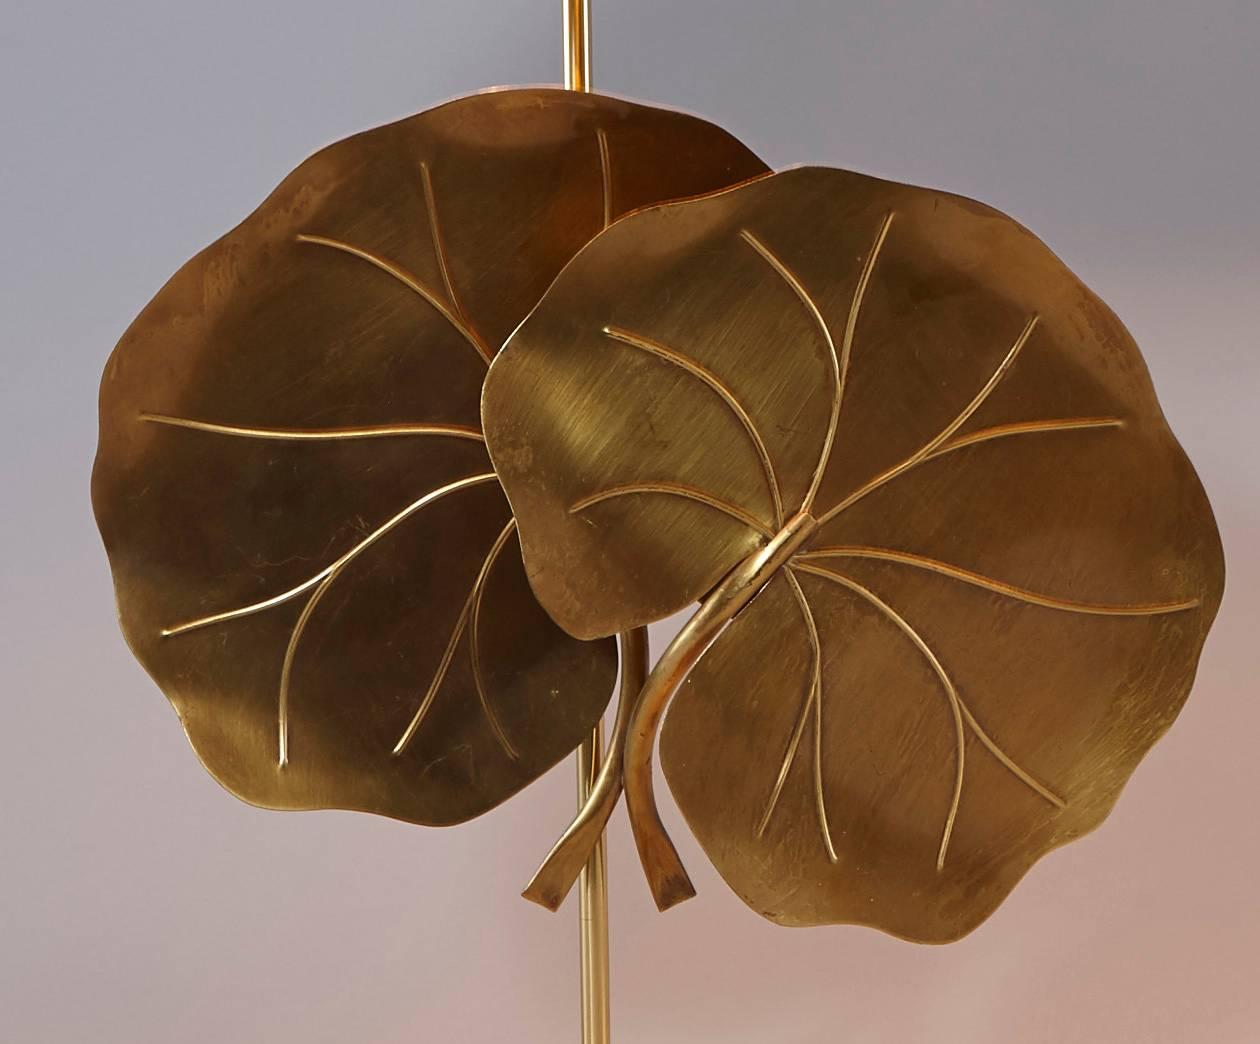 Pair of Brass Table Lamps with Lotus Leaves and green Silk Shades.
Lotus leaves originally Wall Scones.